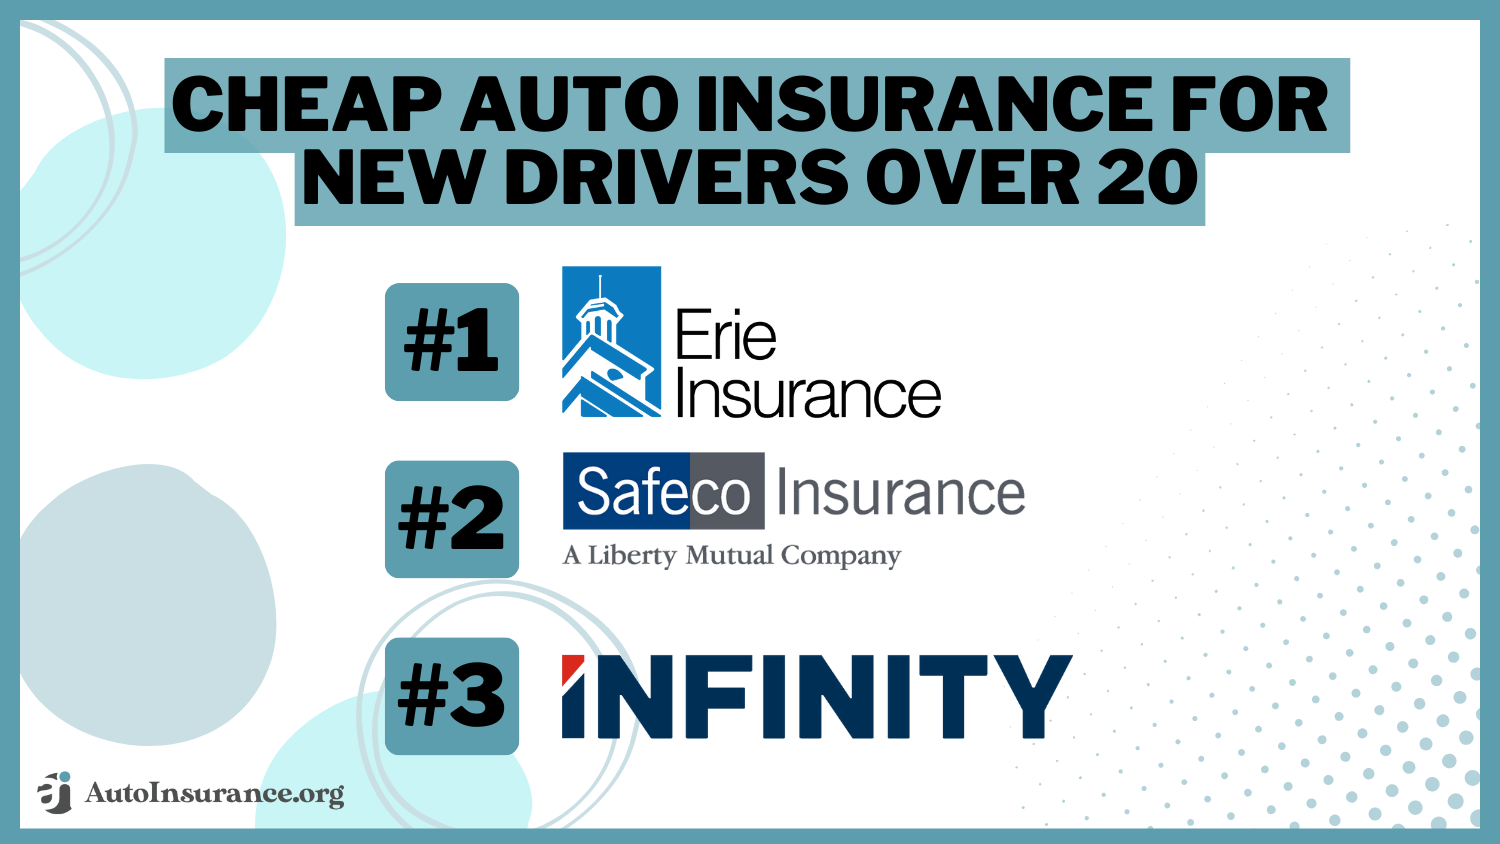 cheap auto insurance for new drivers over 20: Erie, Safeco, Infinity